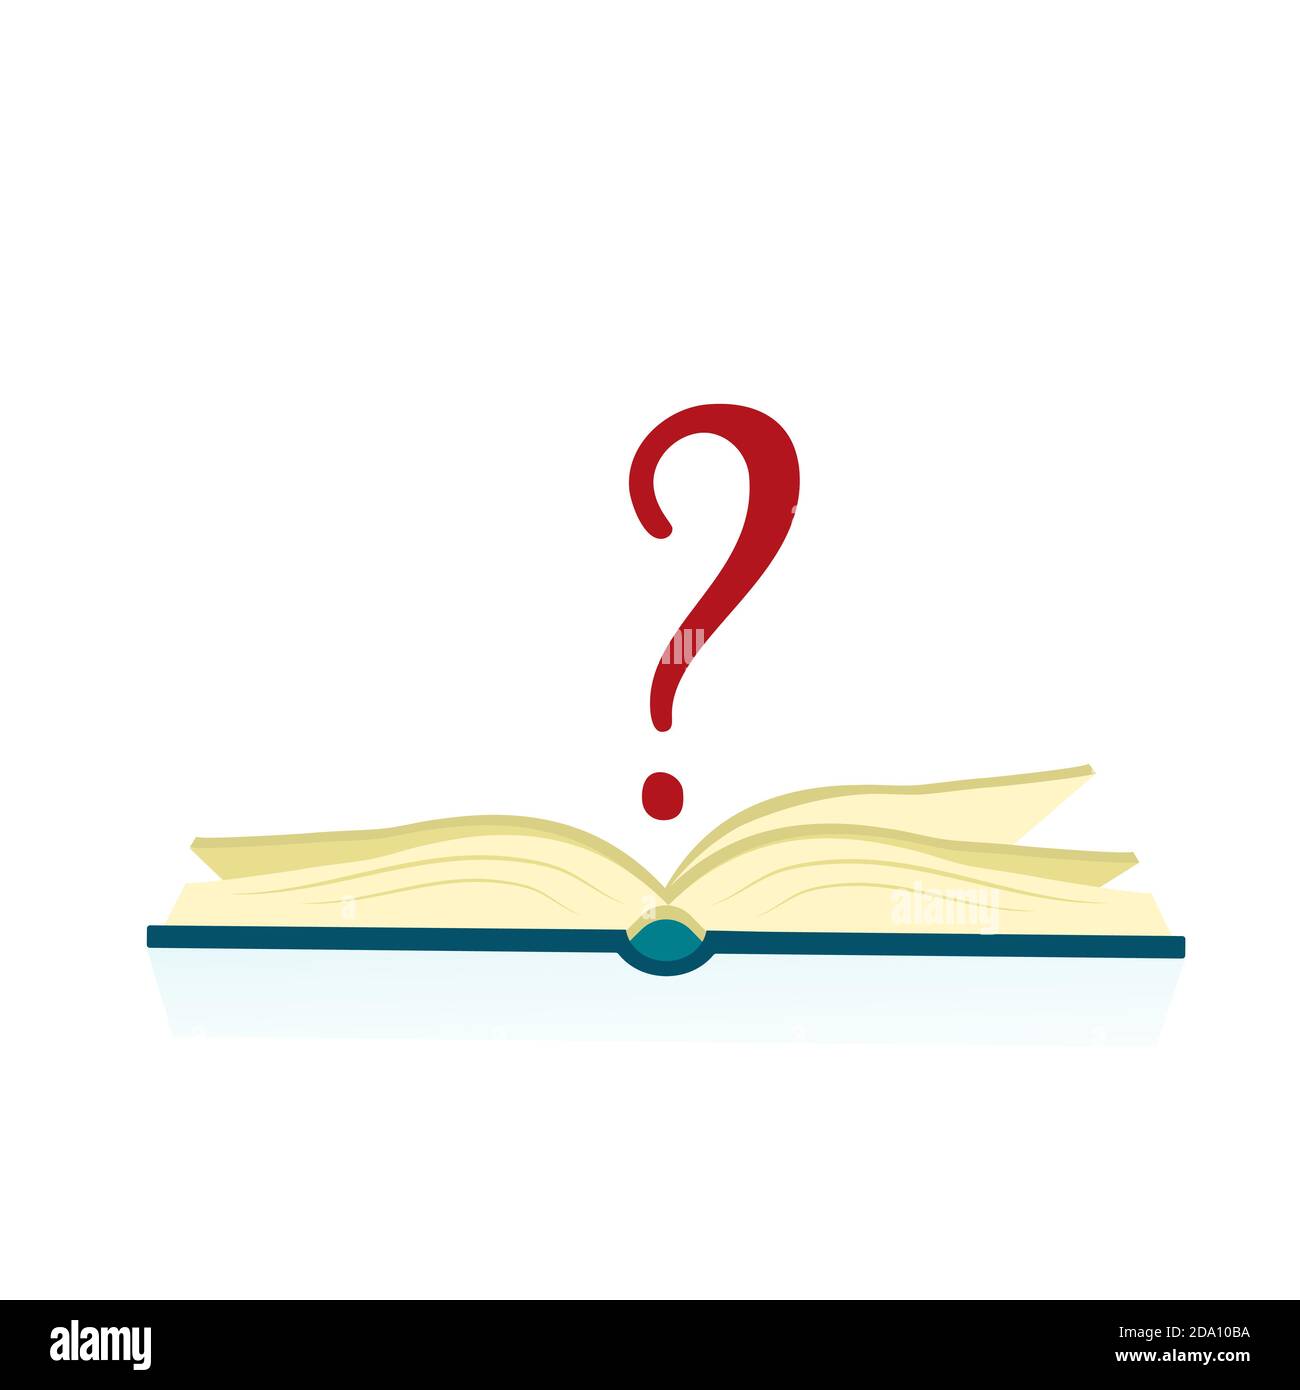 Open book with red question mark, isolated on white background. Knowledge, education, studying concept. Vector flat illustration. Stock Vector